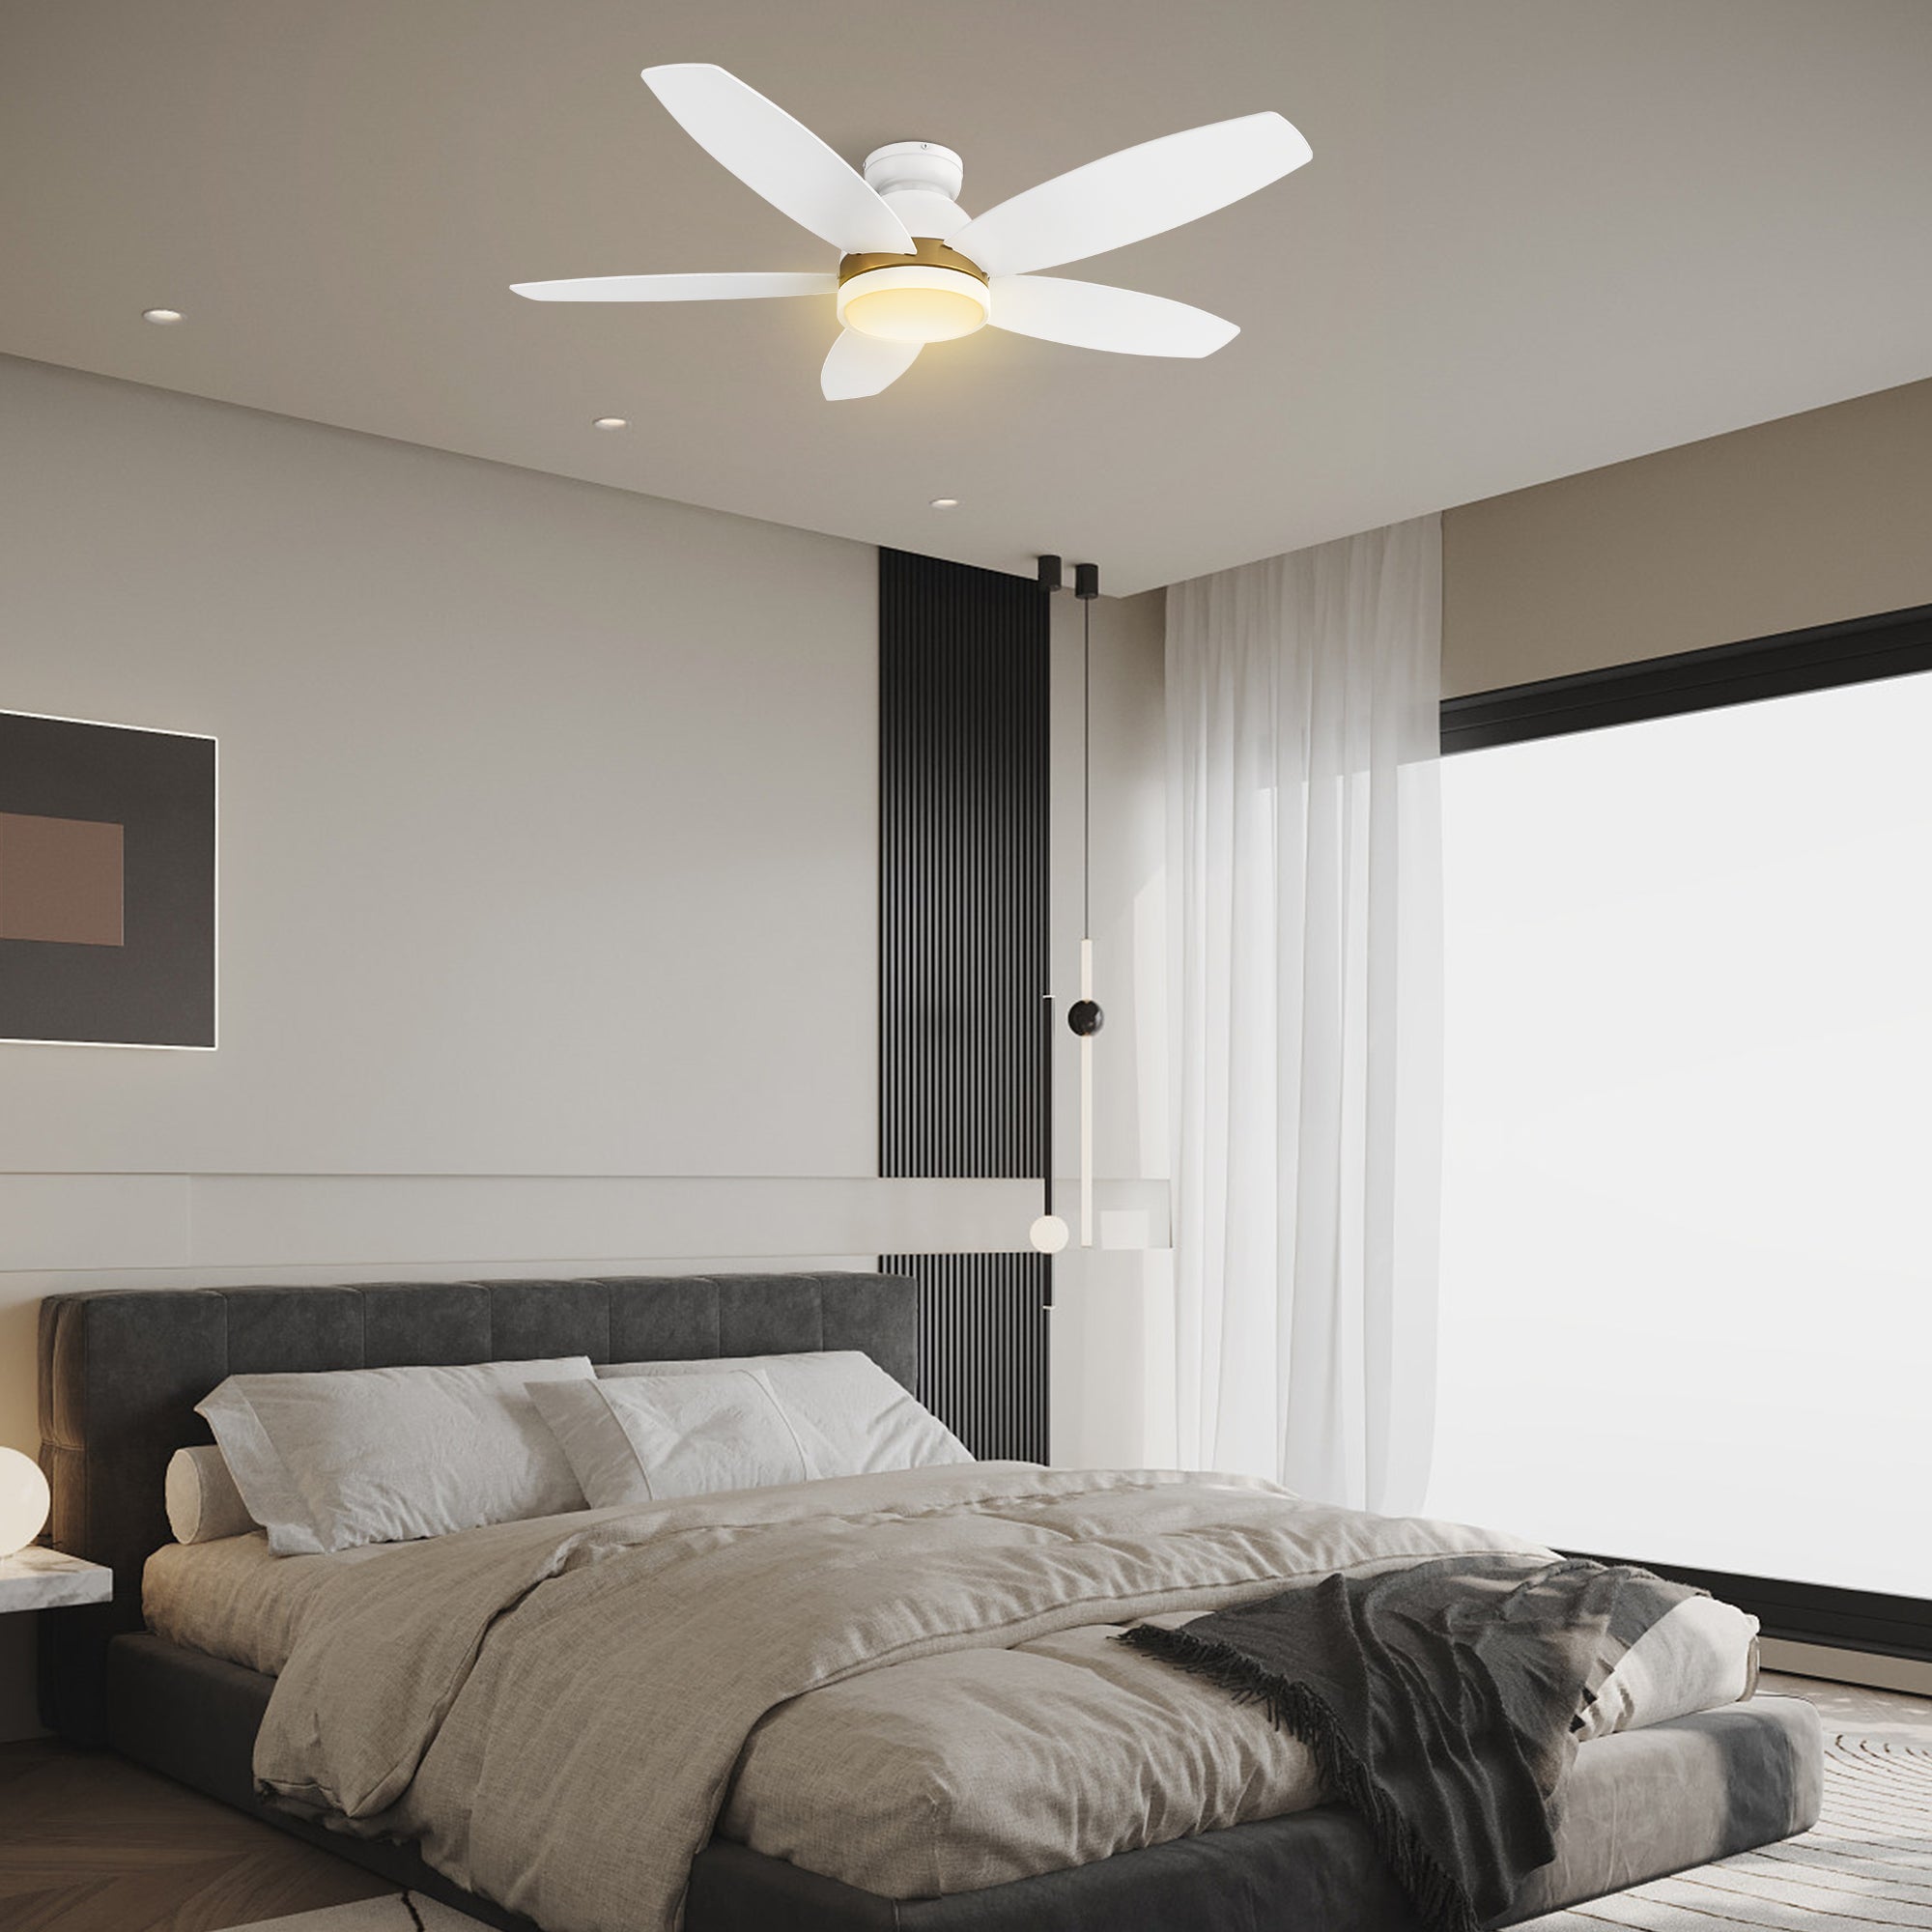 This Levi 48'' smart ceiling fan keeps your space cool, bright, and stylish. It is a soft modern masterpiece perfect for your large indoor living spaces. The fan features Remote control, Wi-Fi apps, Siri Shortcut and Voice control technology (compatible with Amazon Alexa and Google Home Assistant ) to set fan preferences. #color_White